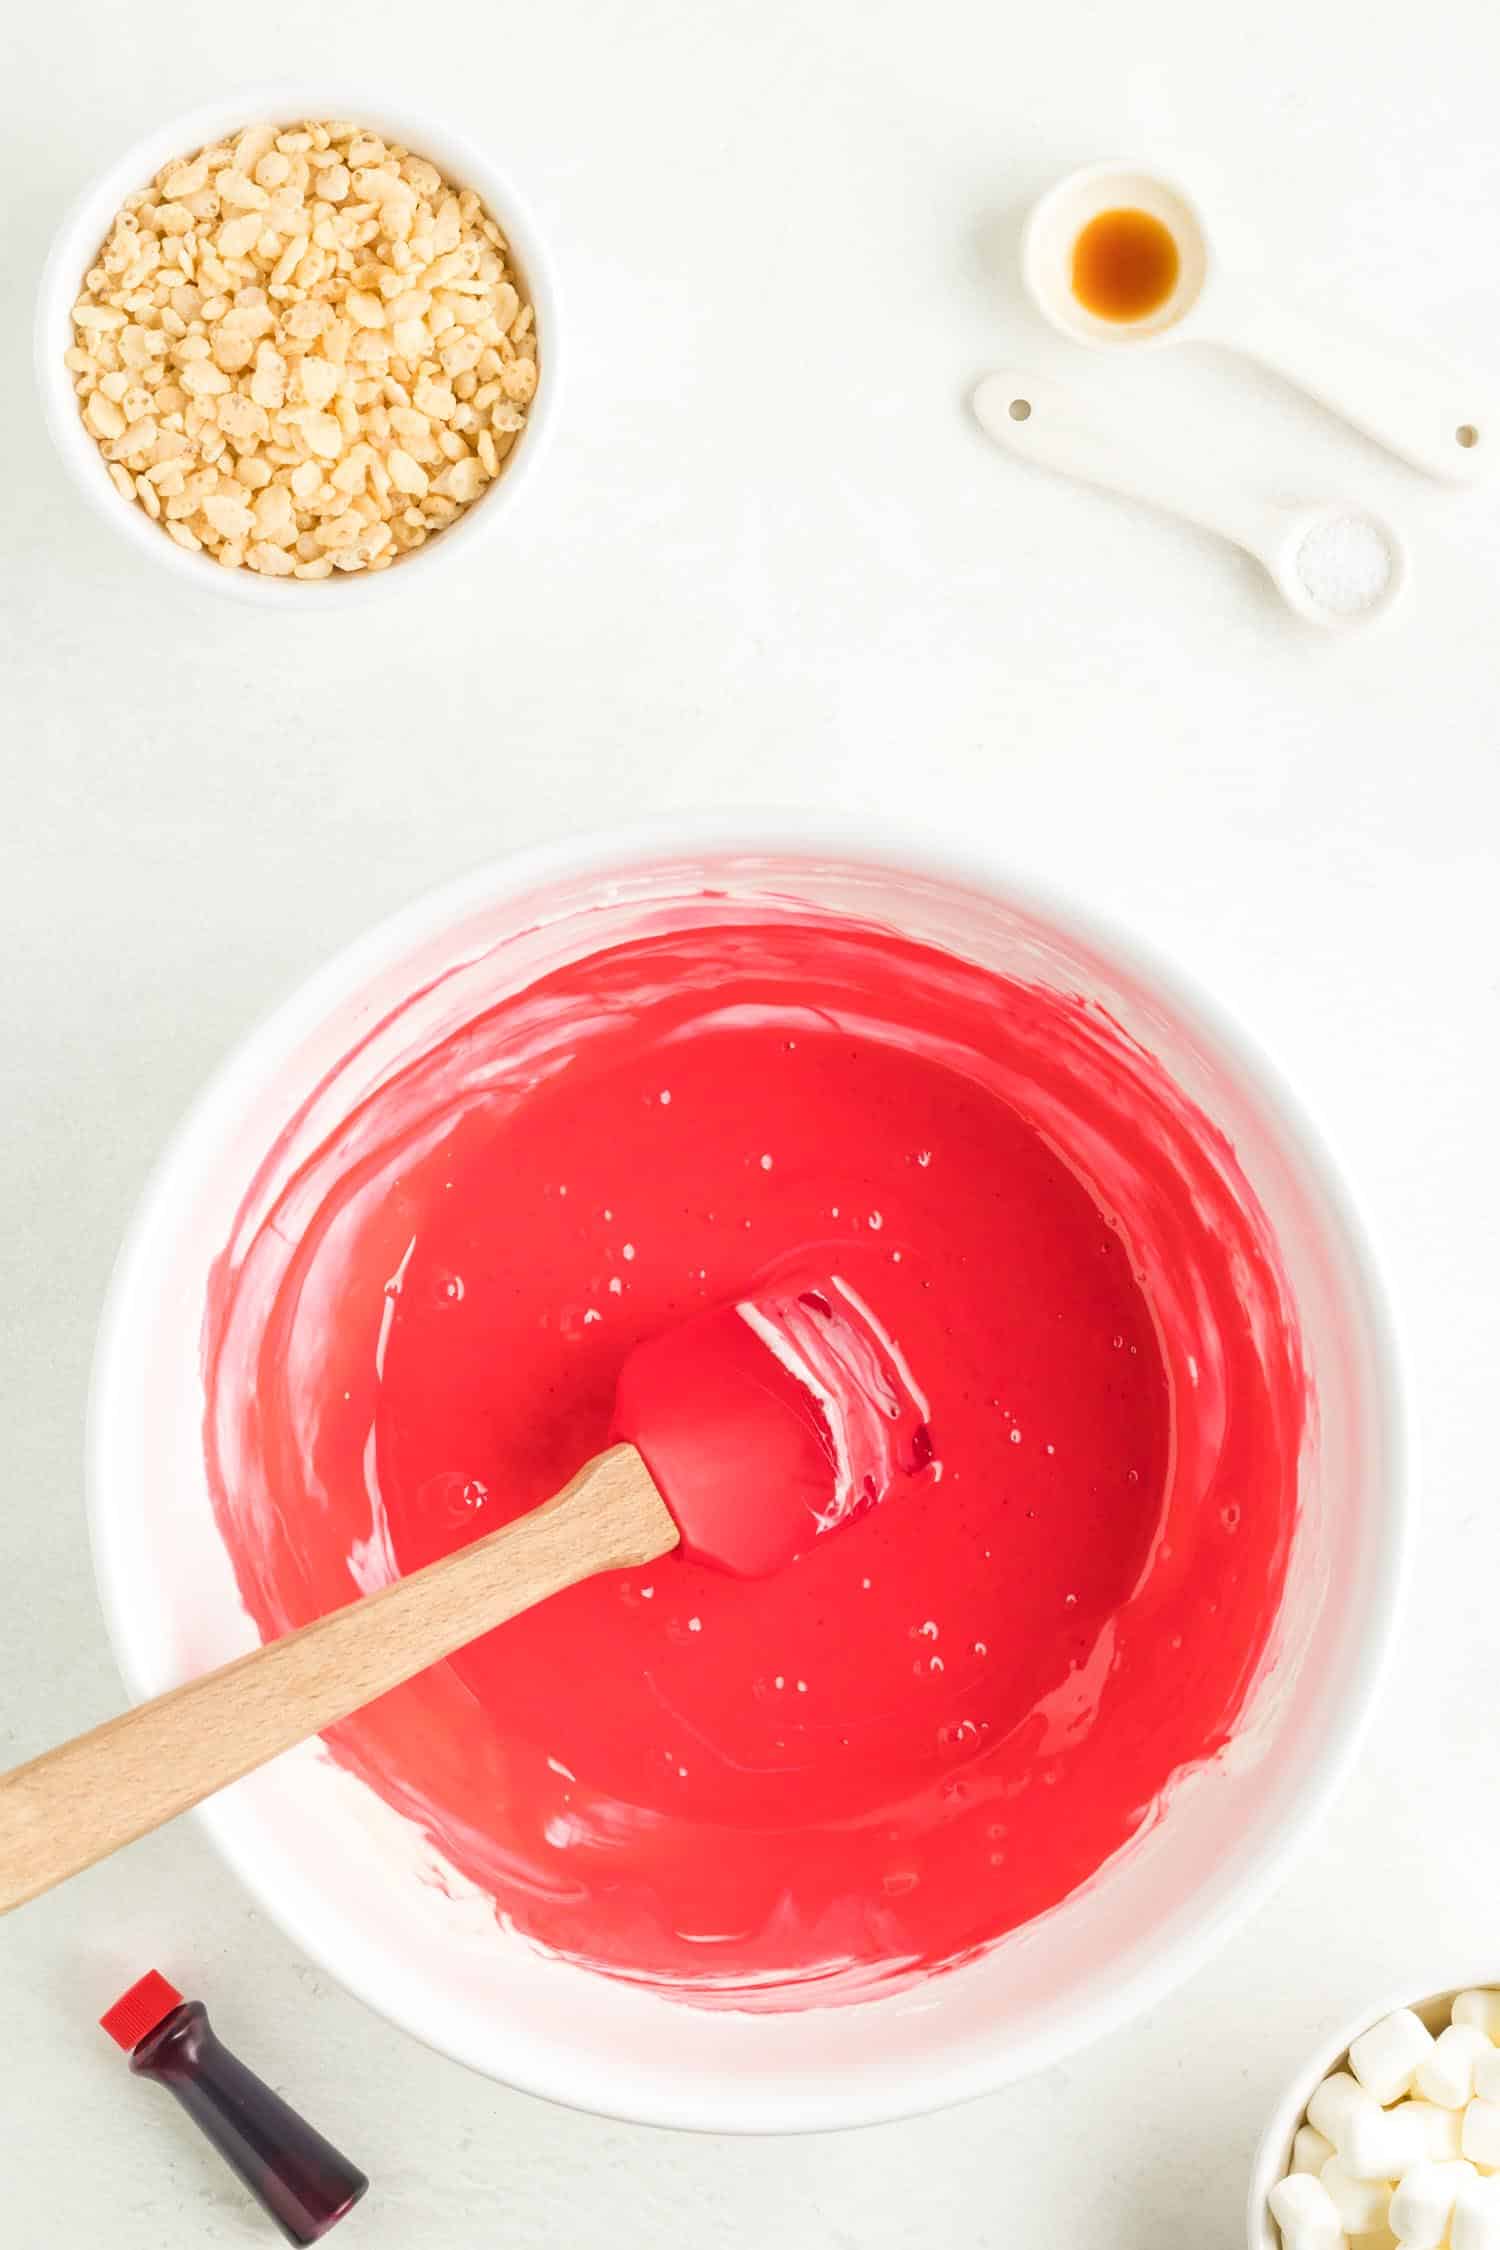 Overhead of red food coloring added into mixing bowl on white background